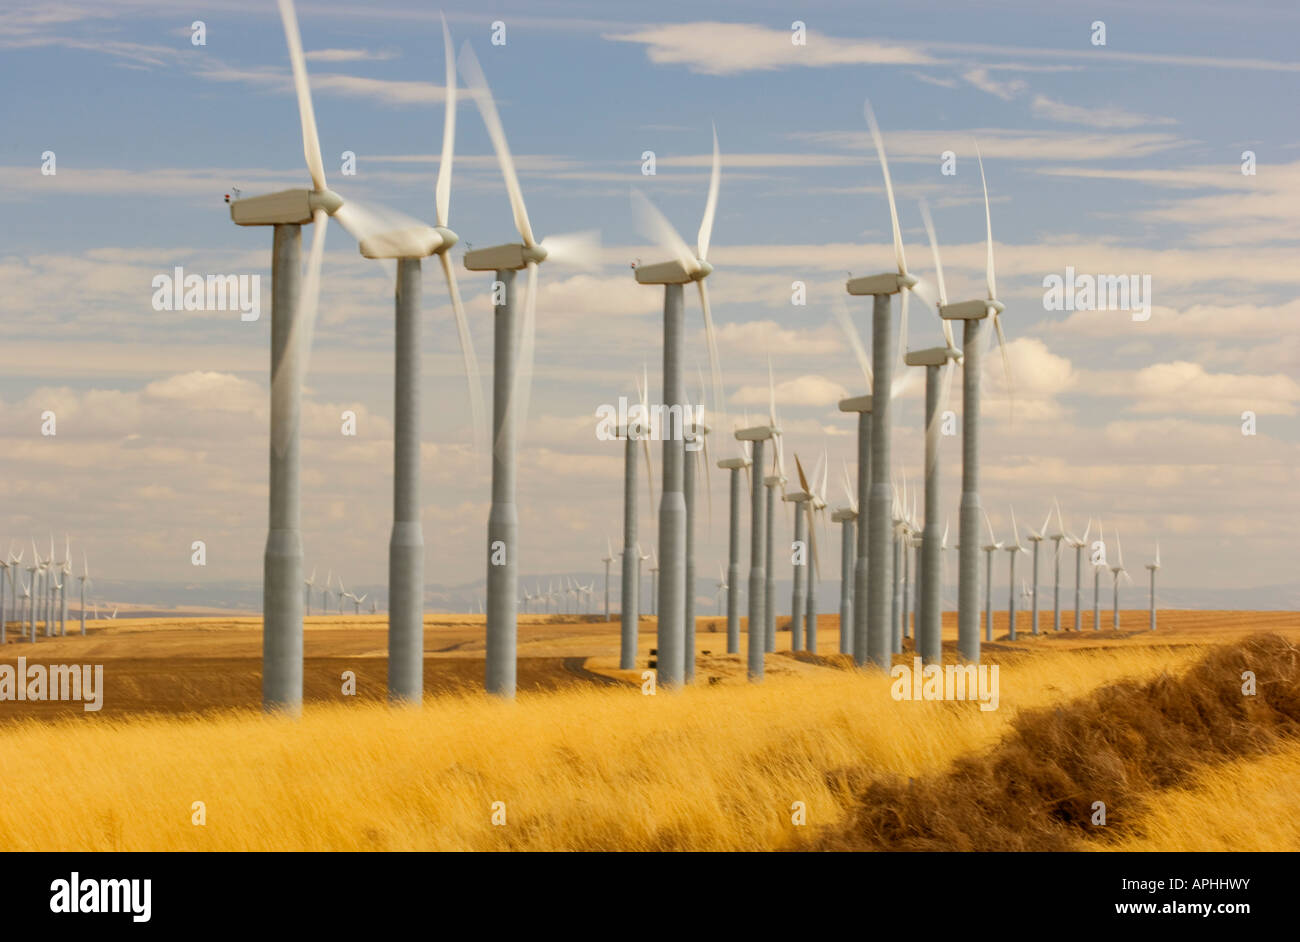 The propellers of wind turbines spin and generate electricity in southeast Washington State Stock Photo